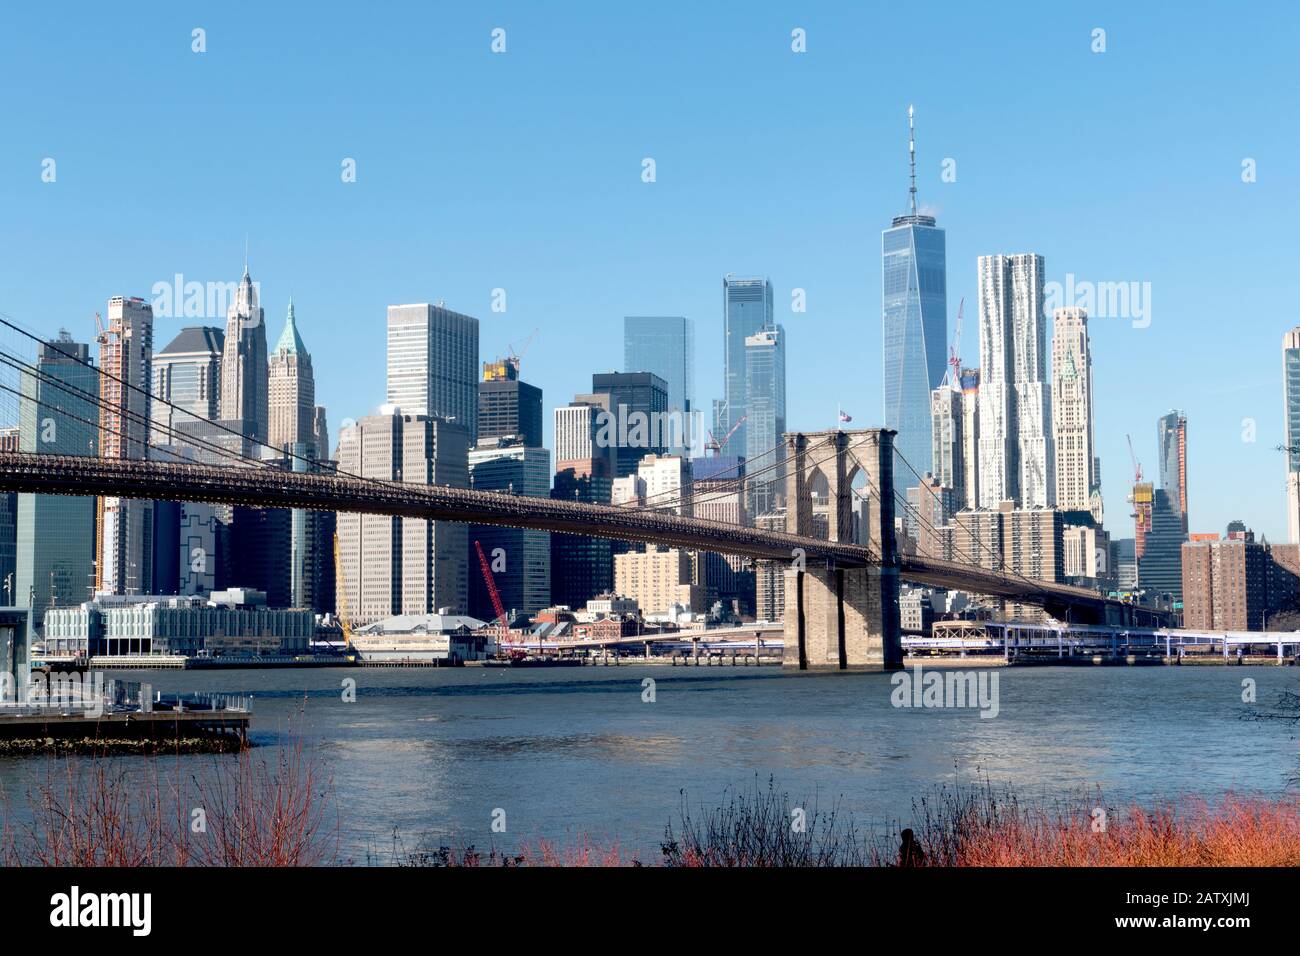 Lower Manhattan Skyline 19 Featuring One World Trade Center And The Iconic Brooklyn Bridge Spanning The East River New York City Usa Stock Photo Alamy